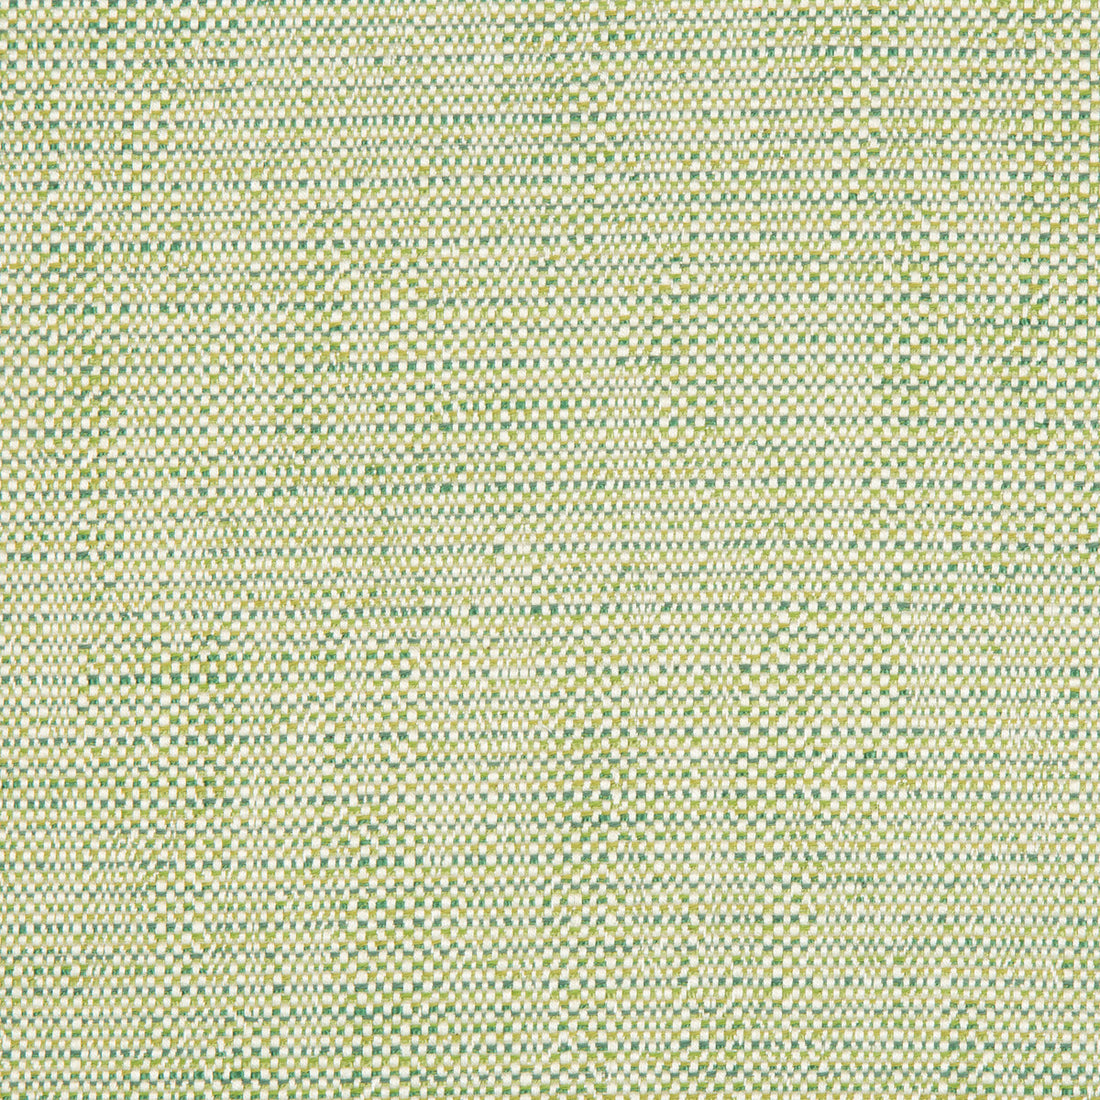 Kravet Contract fabric in 34768-3 color - pattern 34768.3.0 - by Kravet Contract in the Gis collection